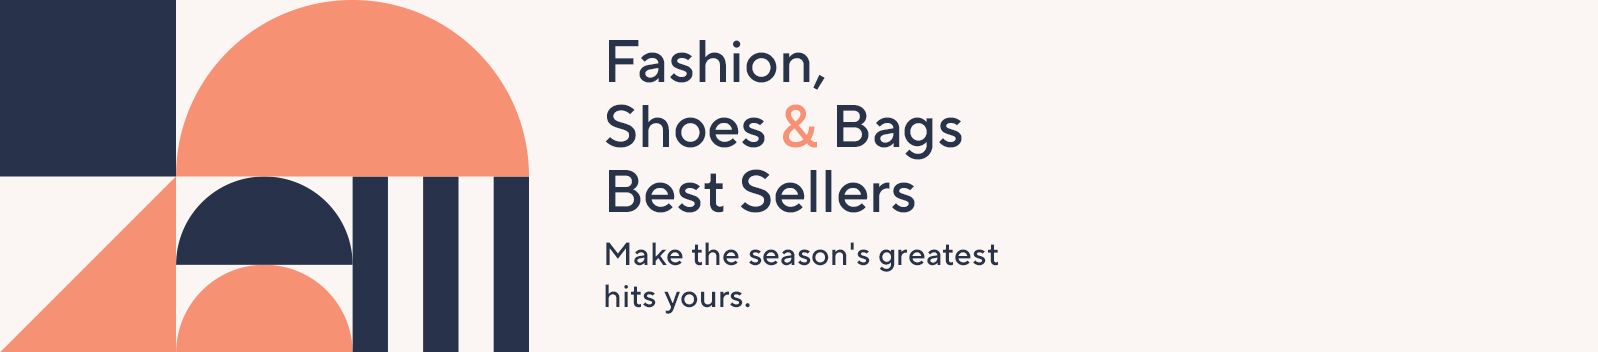 Fashion, Shoes & Bags Best Sellers: Make the season's greatest hits yours. 